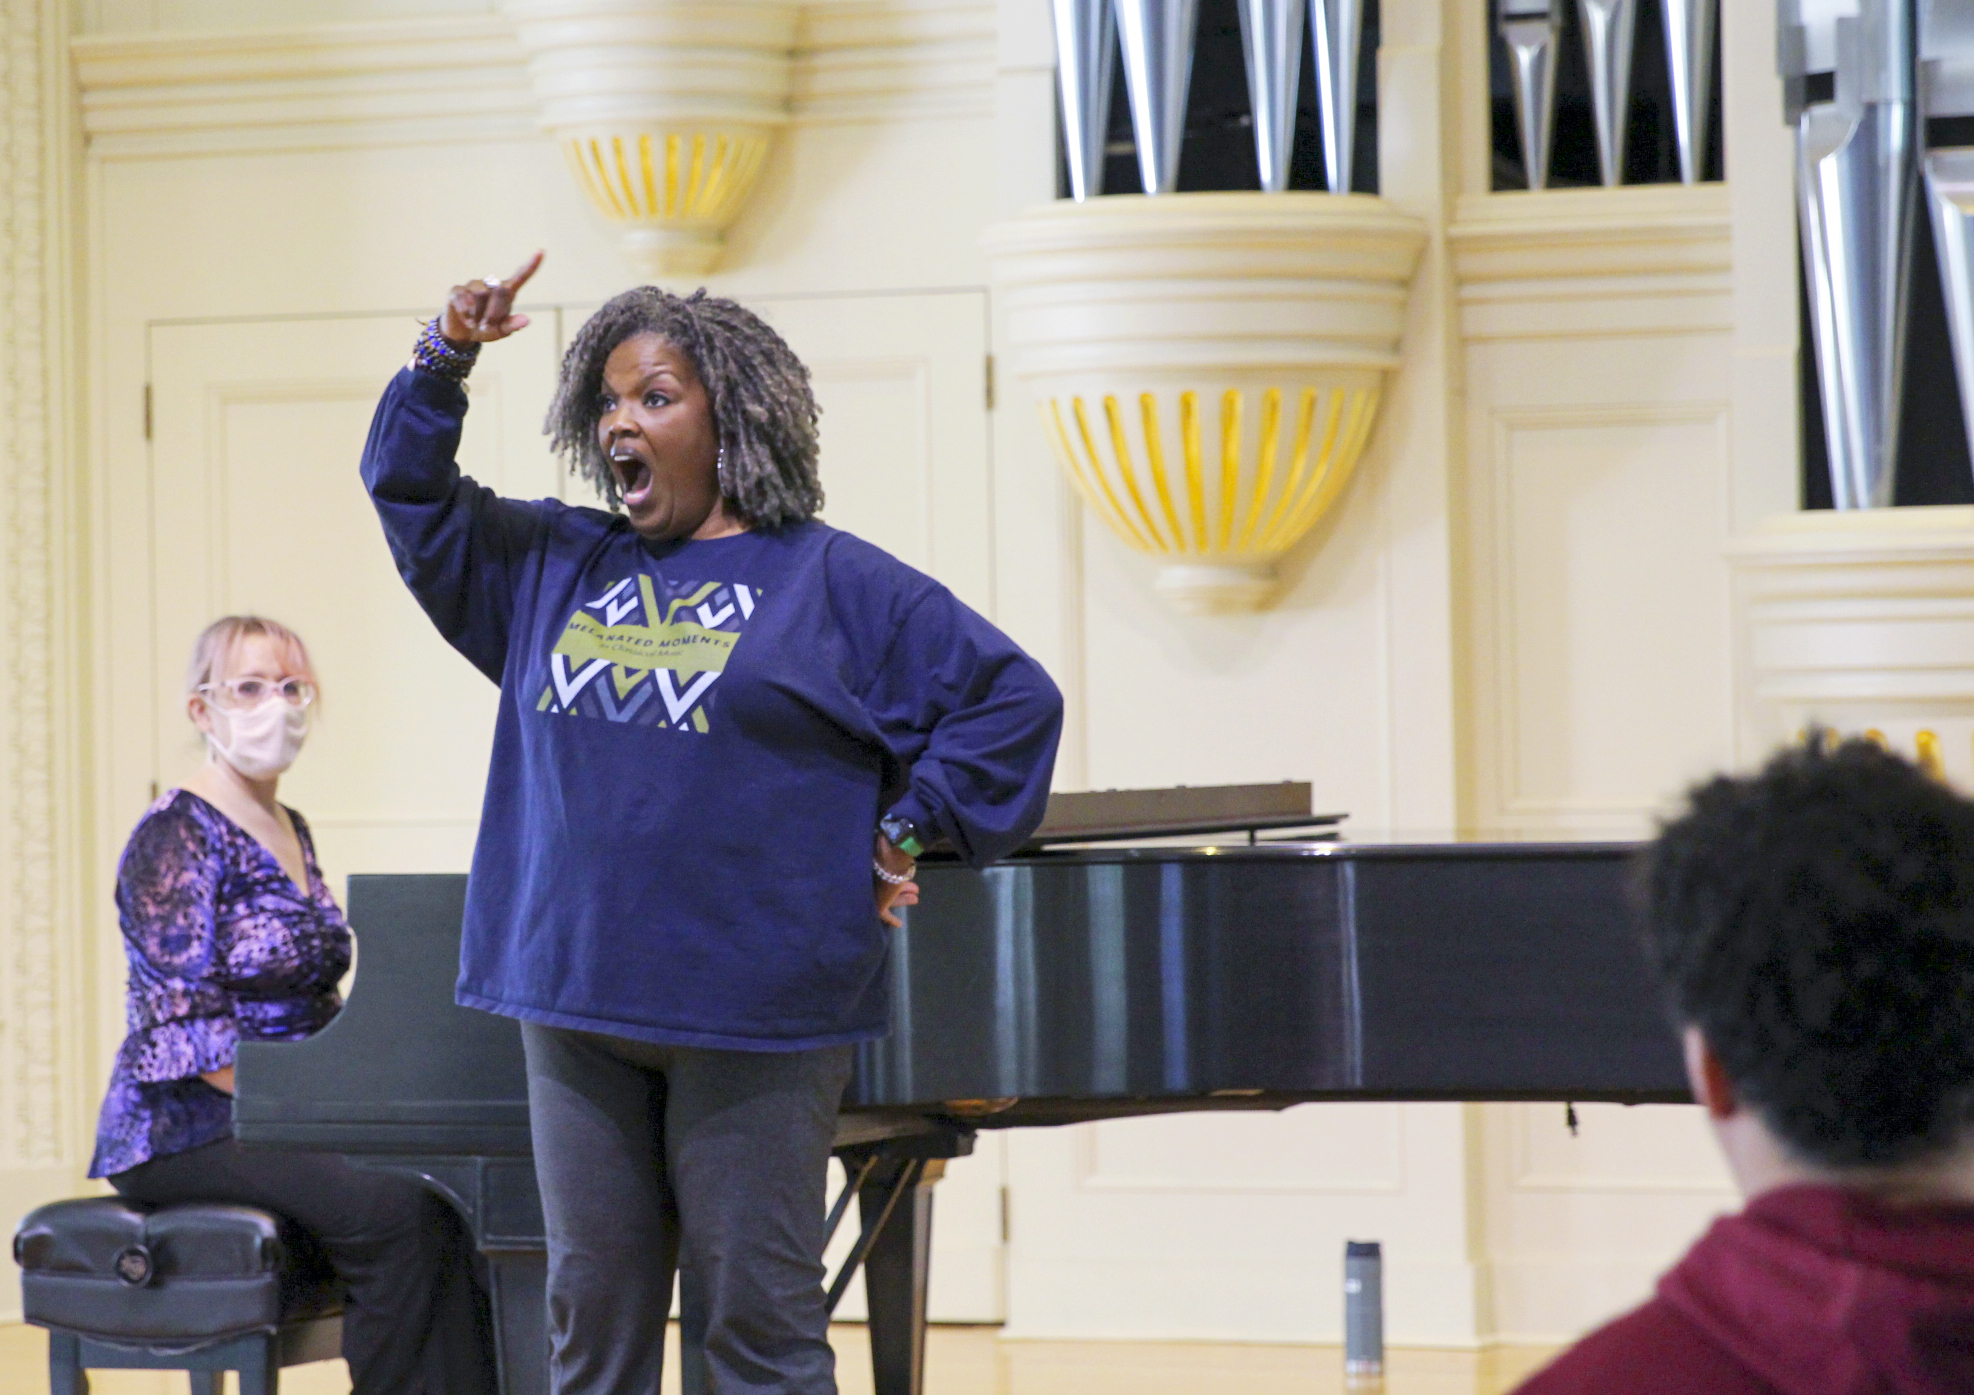 International opera star Angela Brown rehearses with Elon students March 1 in preparation for her show, 